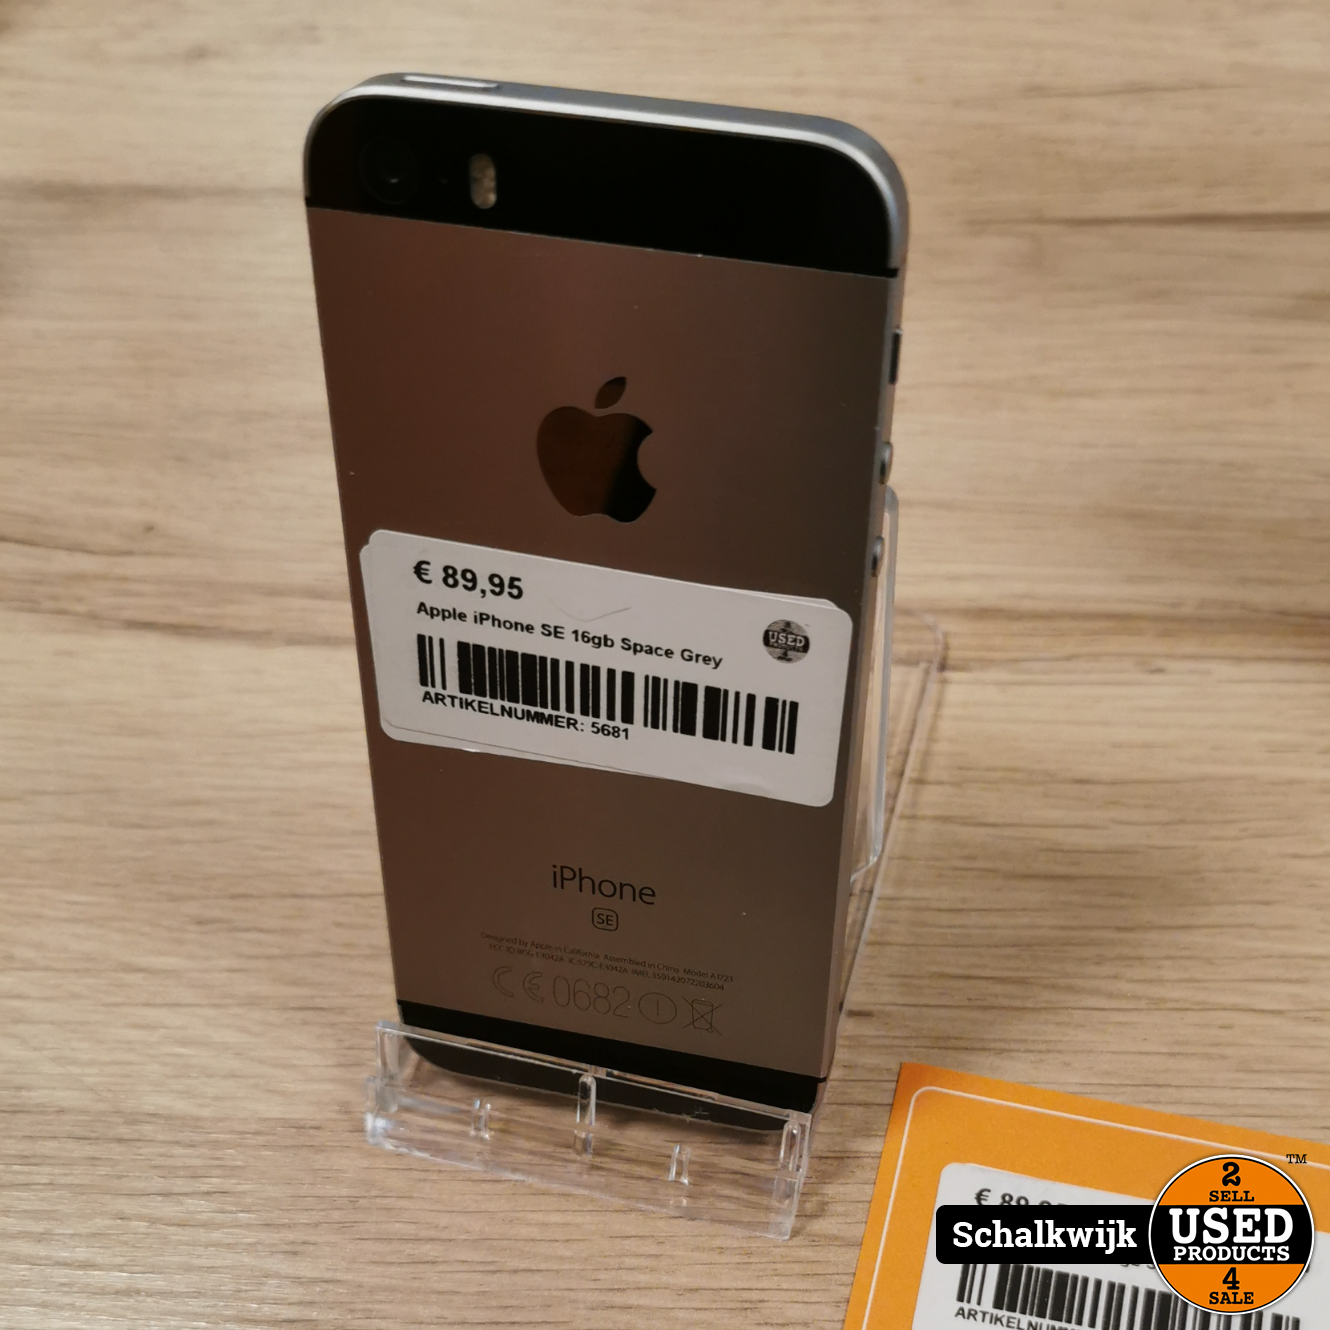 Apple SE 16gb Space Grey - Used Products